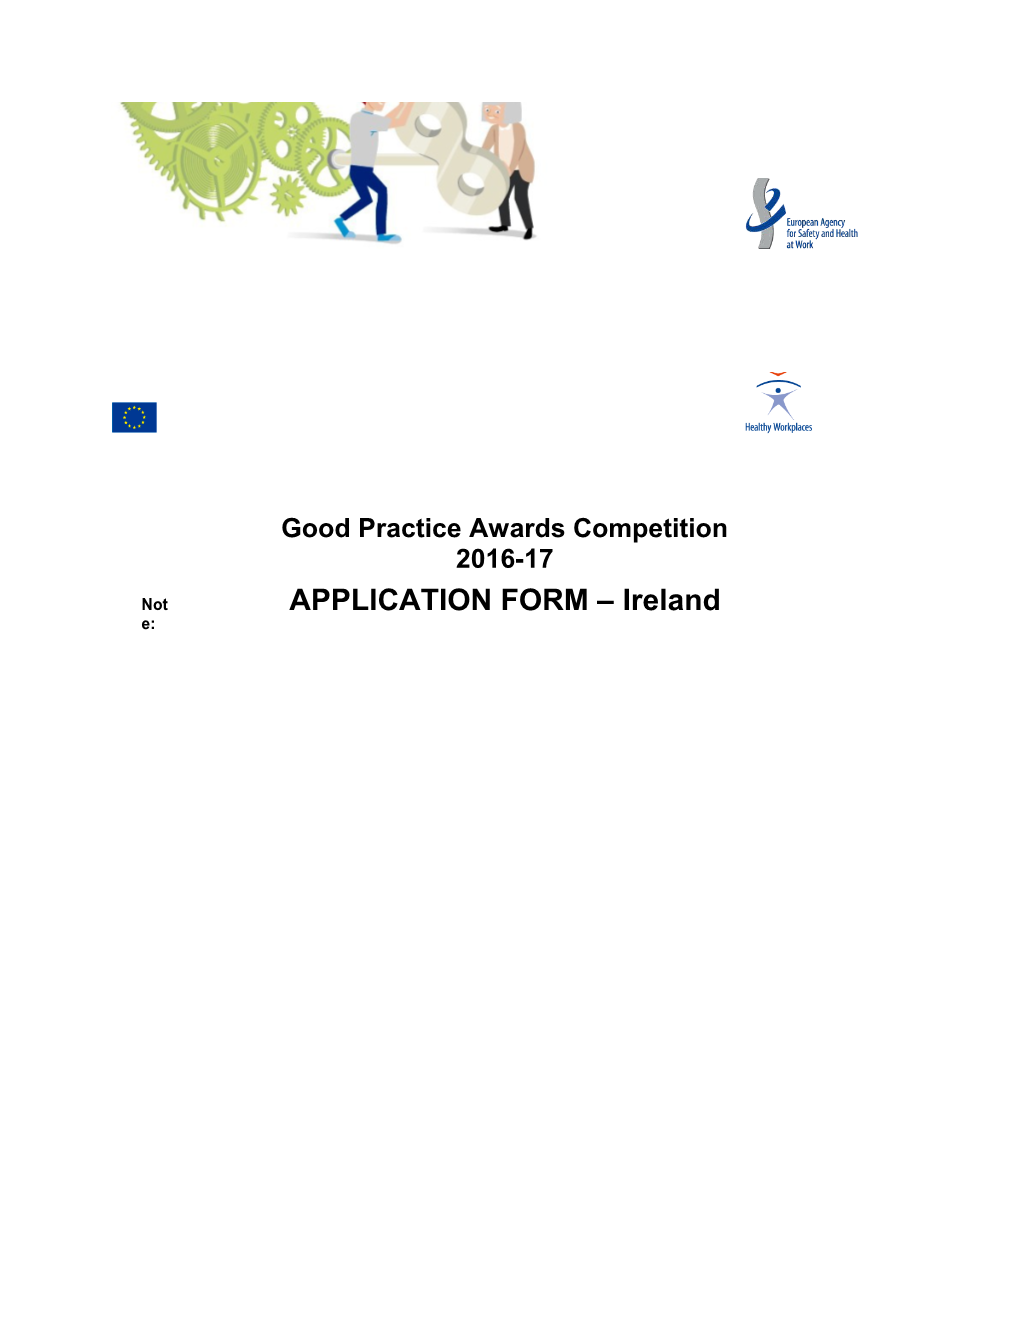 Good Practice Awards Competition2016-17